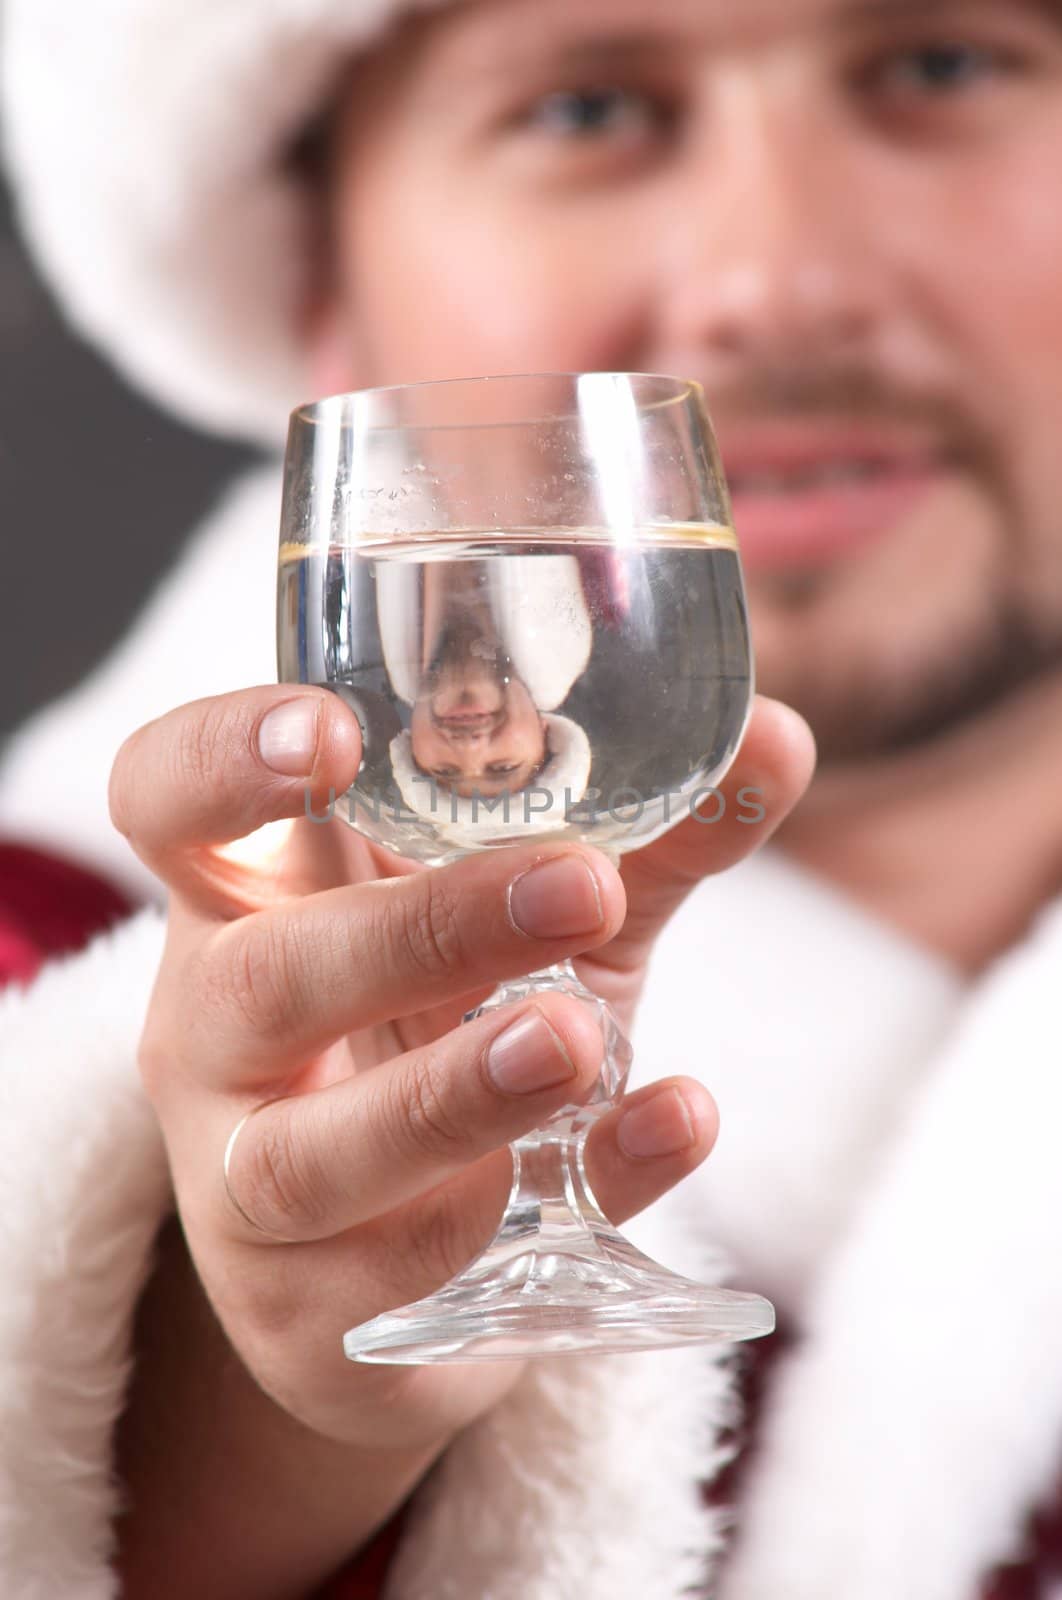 An image of Santa Claus drinking champagne